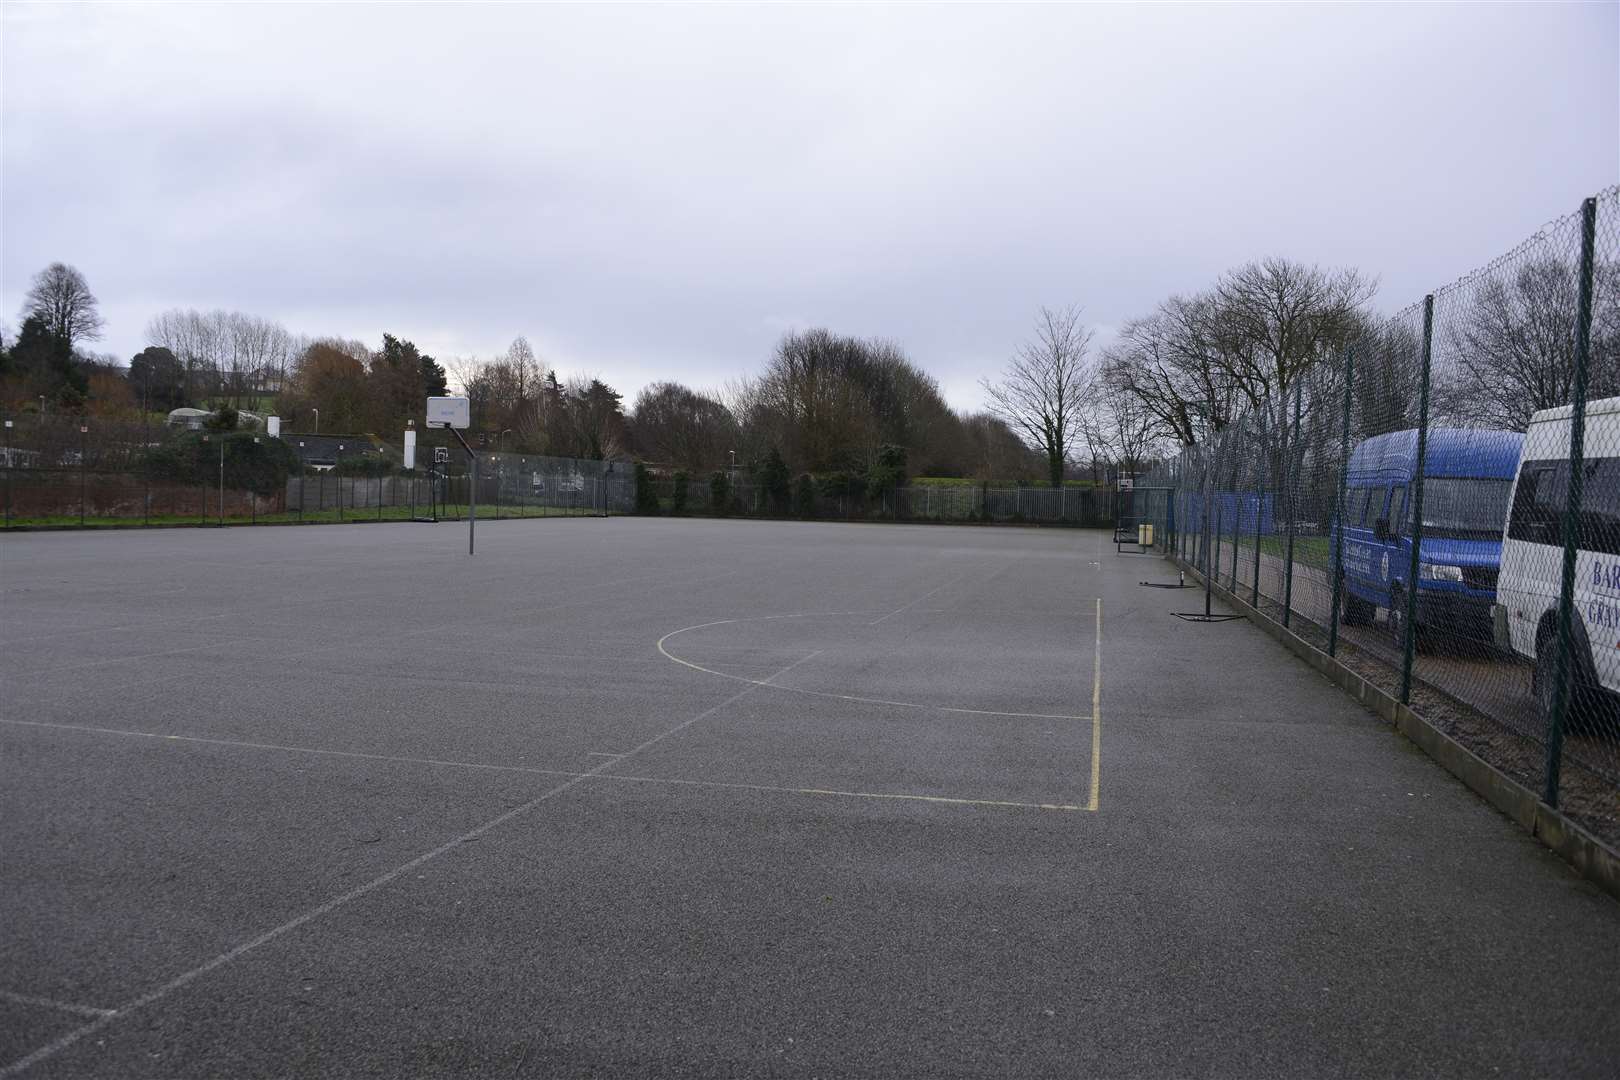 Entrance and car parking proposed on old playground